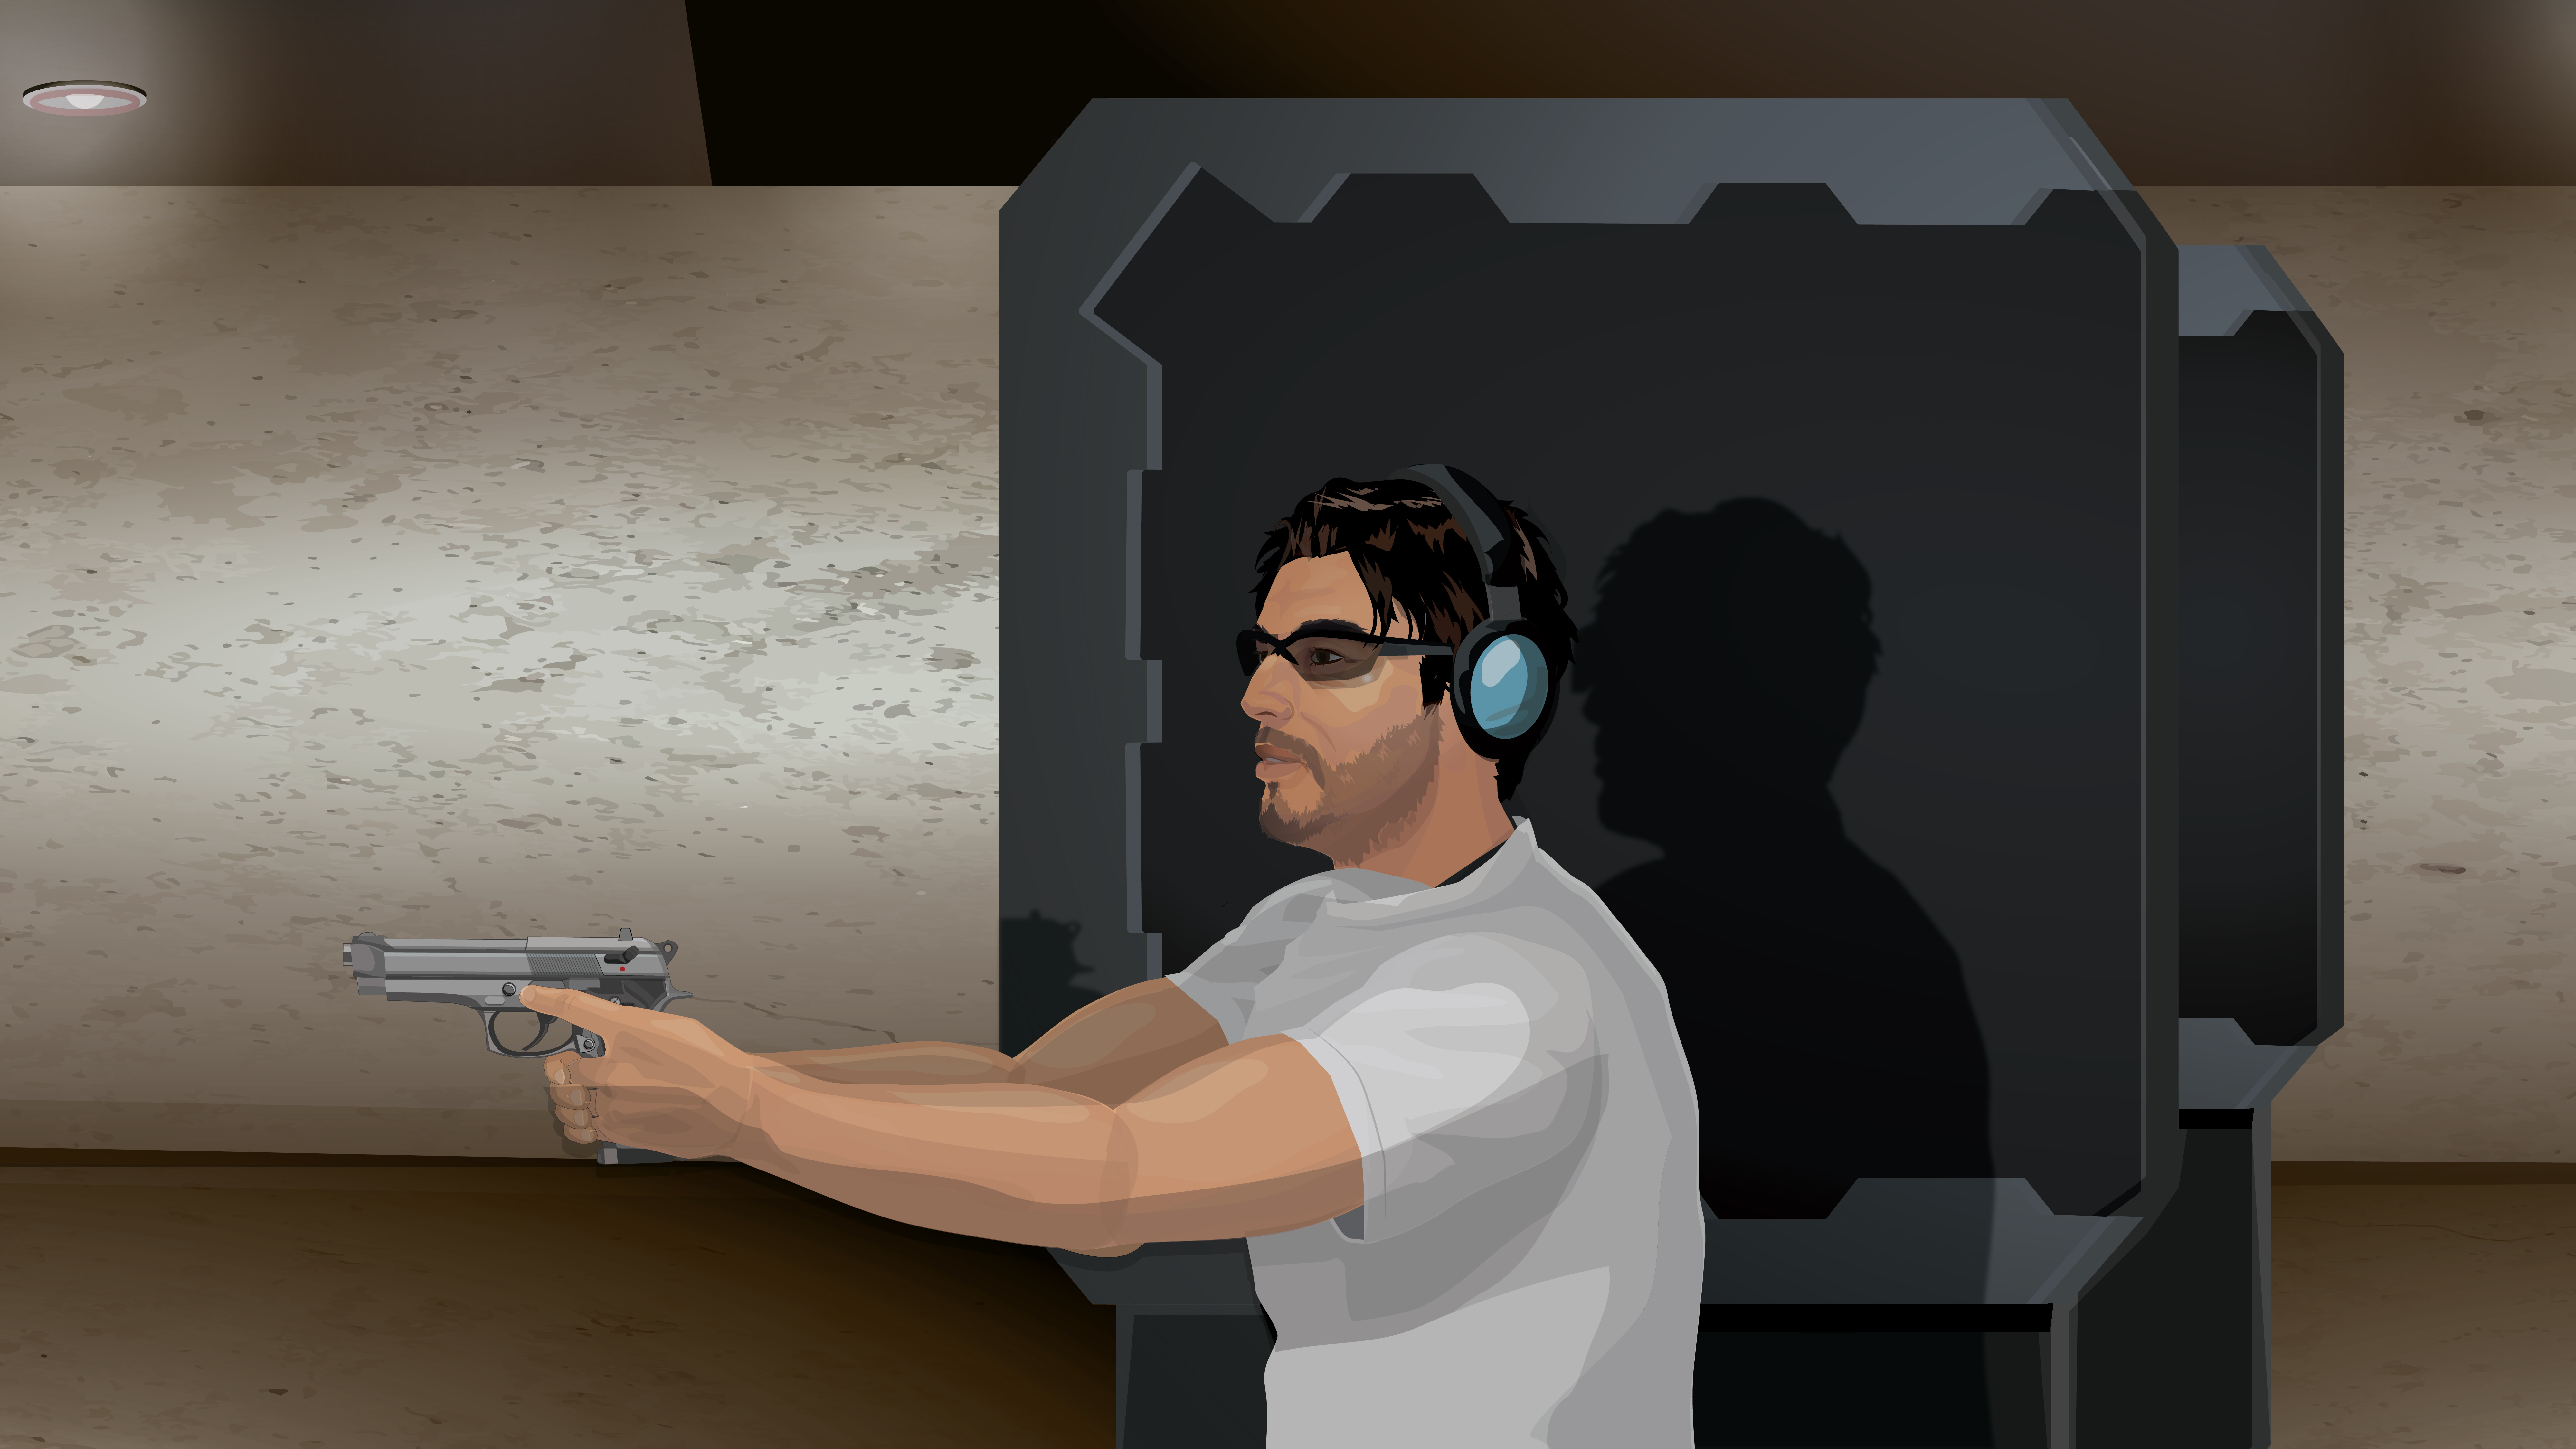 Illustration of a man in a one handed handgun stance at a shooting range.